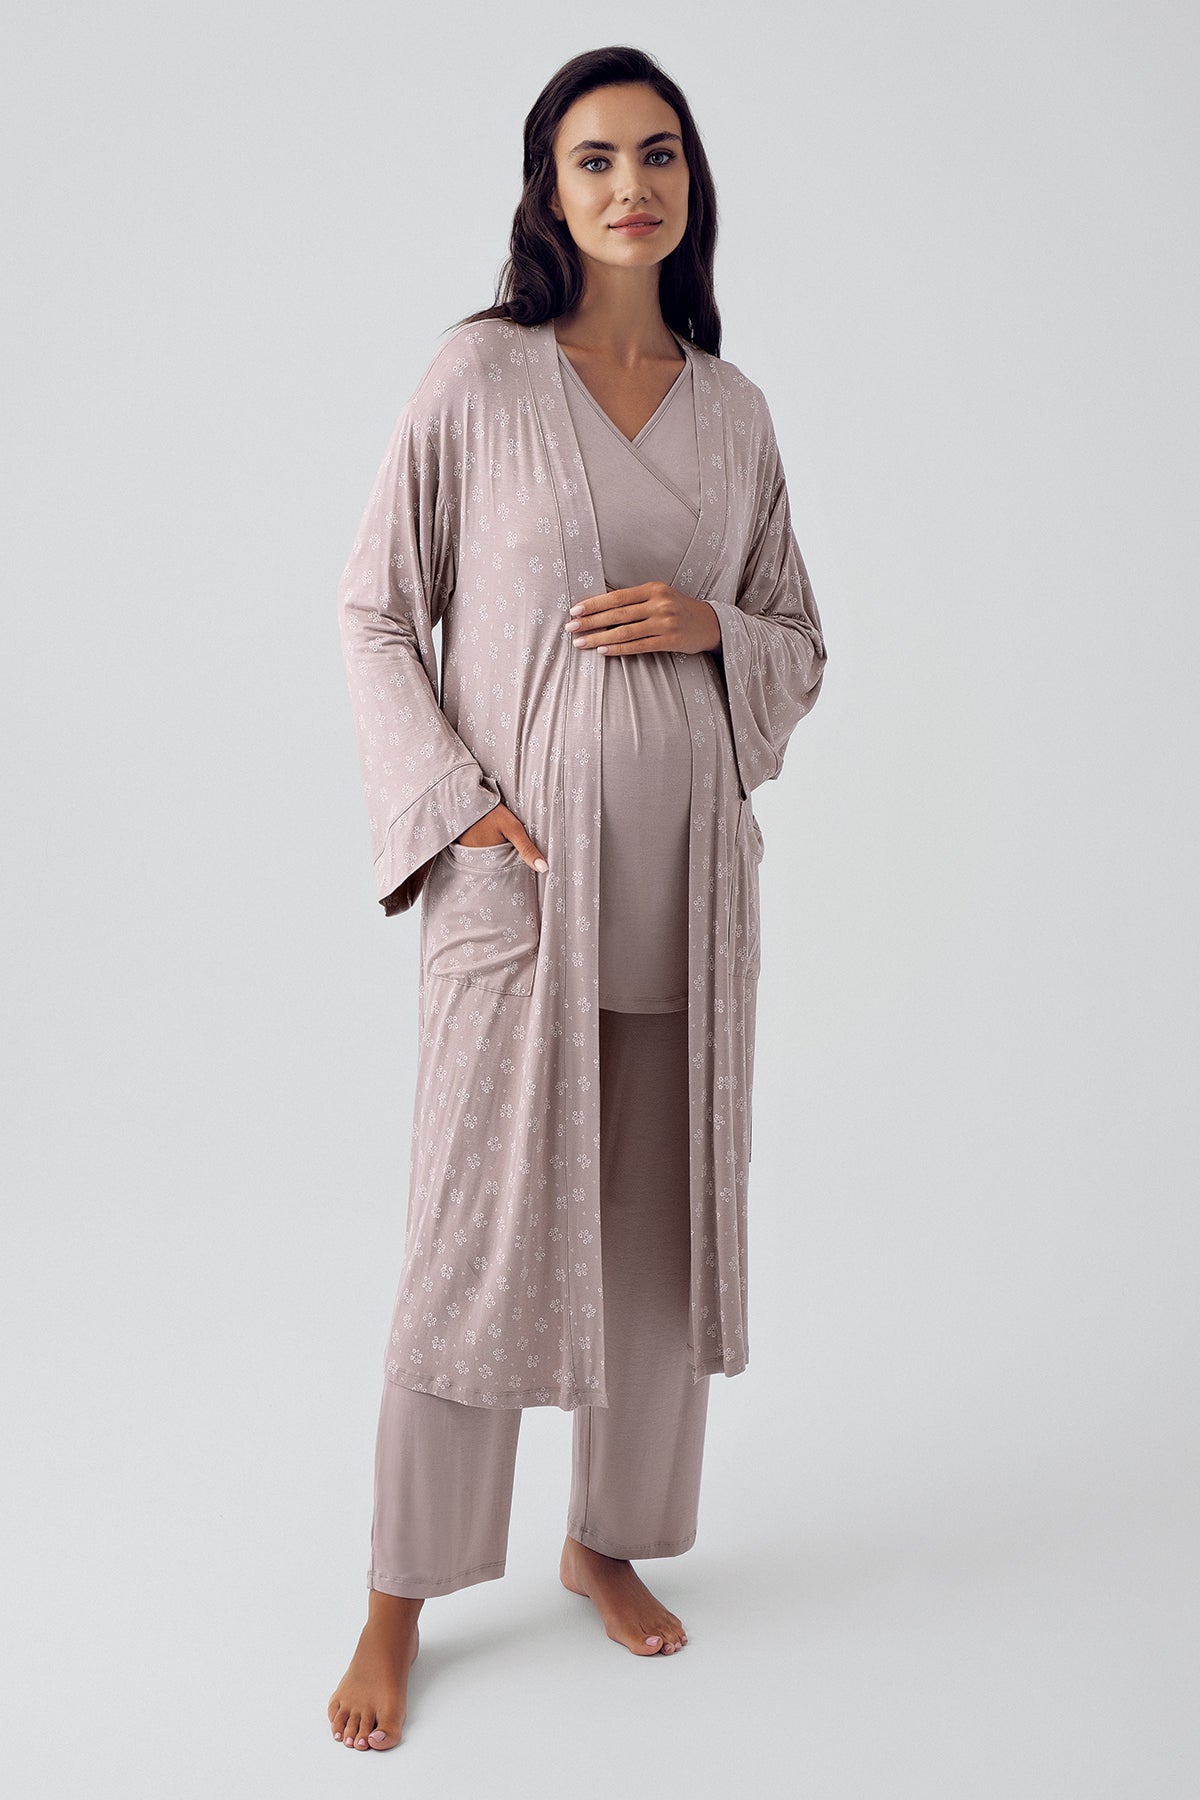 Shopymommy 405205 Patterned Cross Double Breasted 4 Pieces Maternity & Nursing Set Coffee